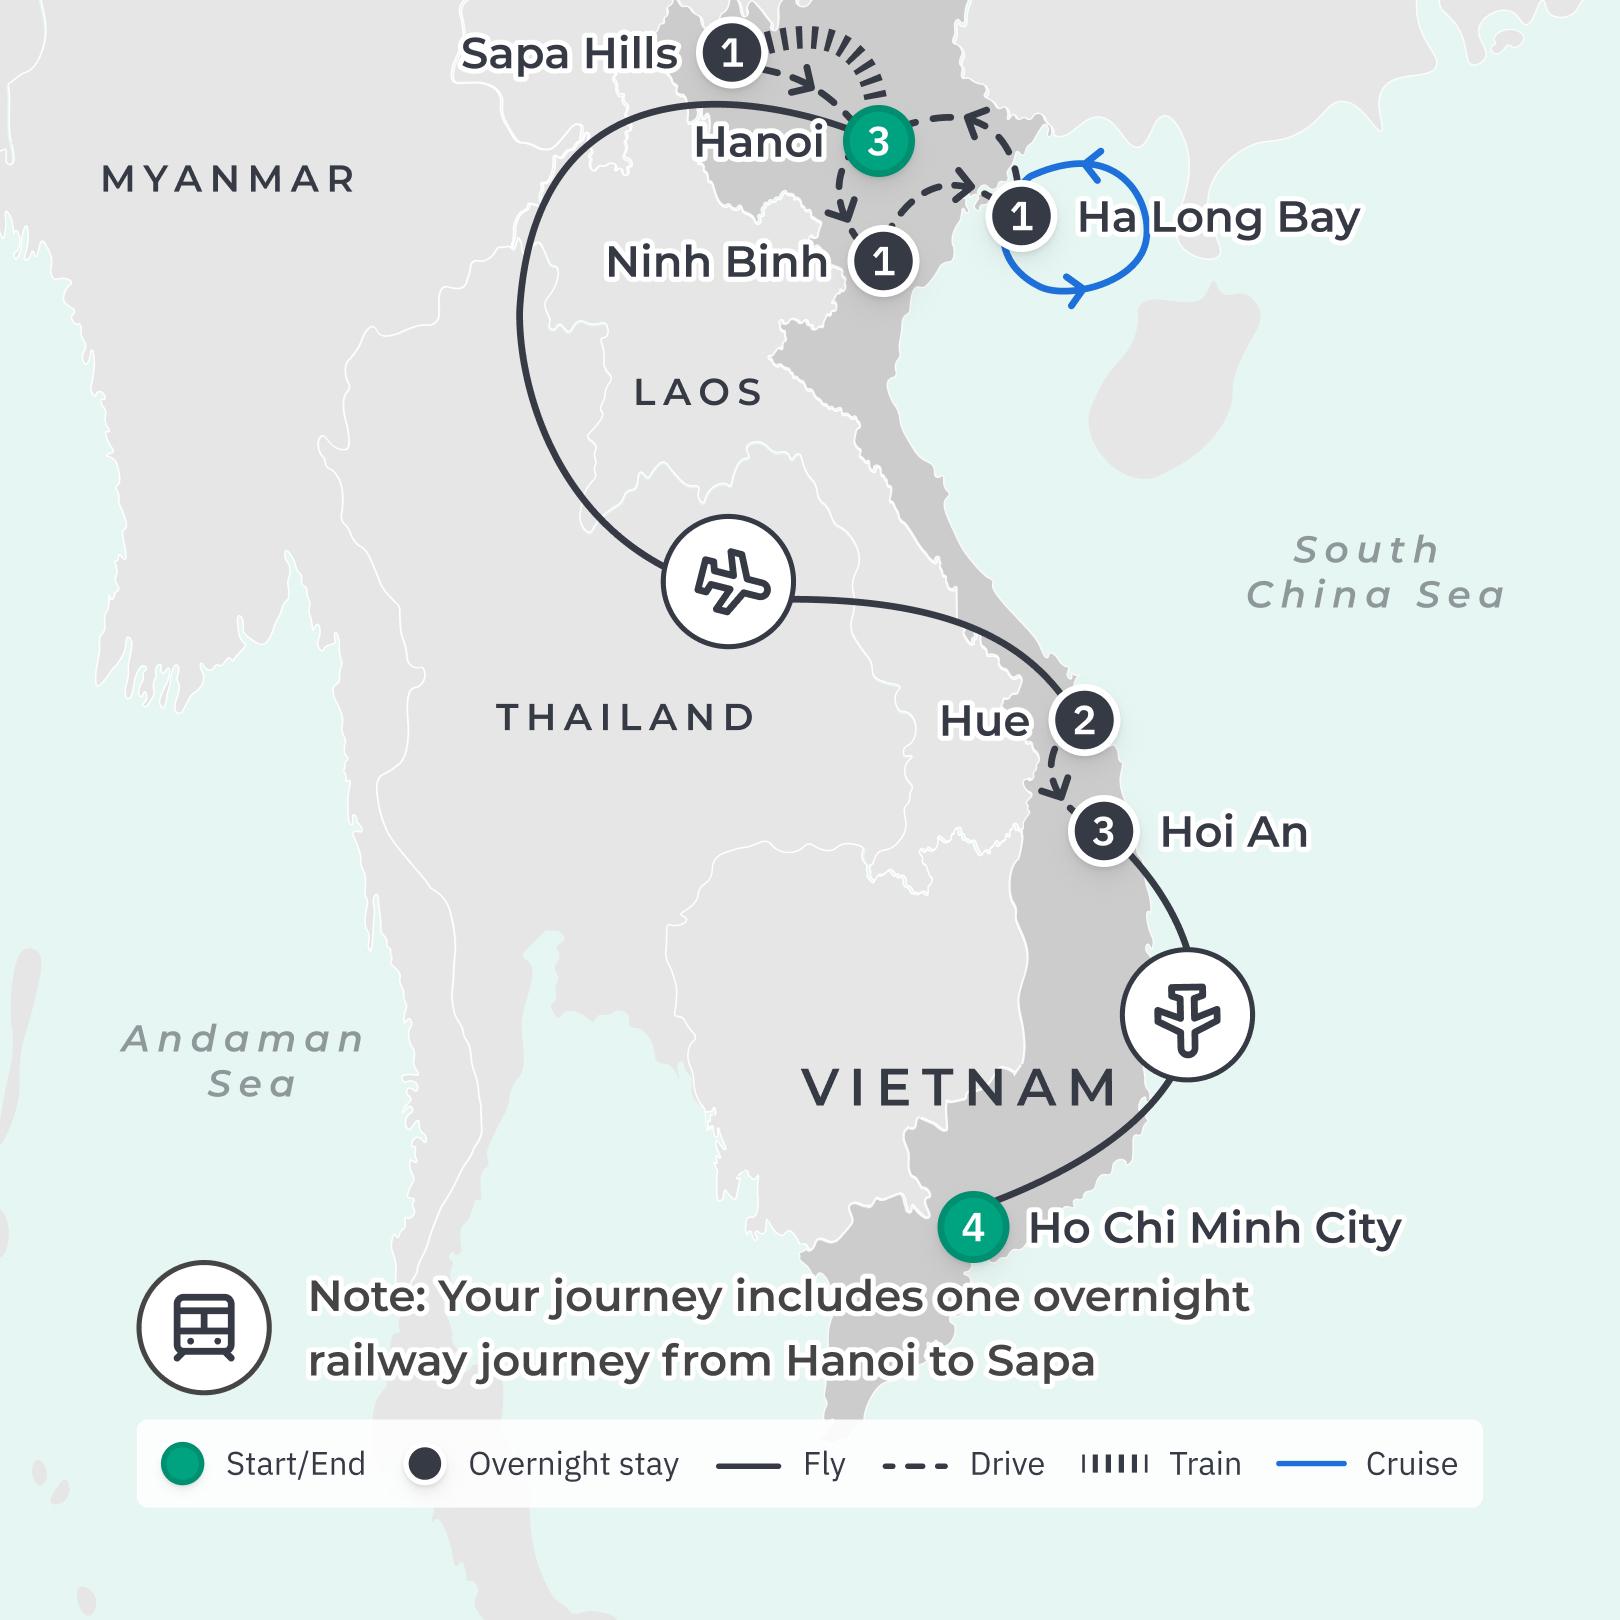 Ultimate Vietnam with Sapa Hills Trek & Mekong Delta Experience route map